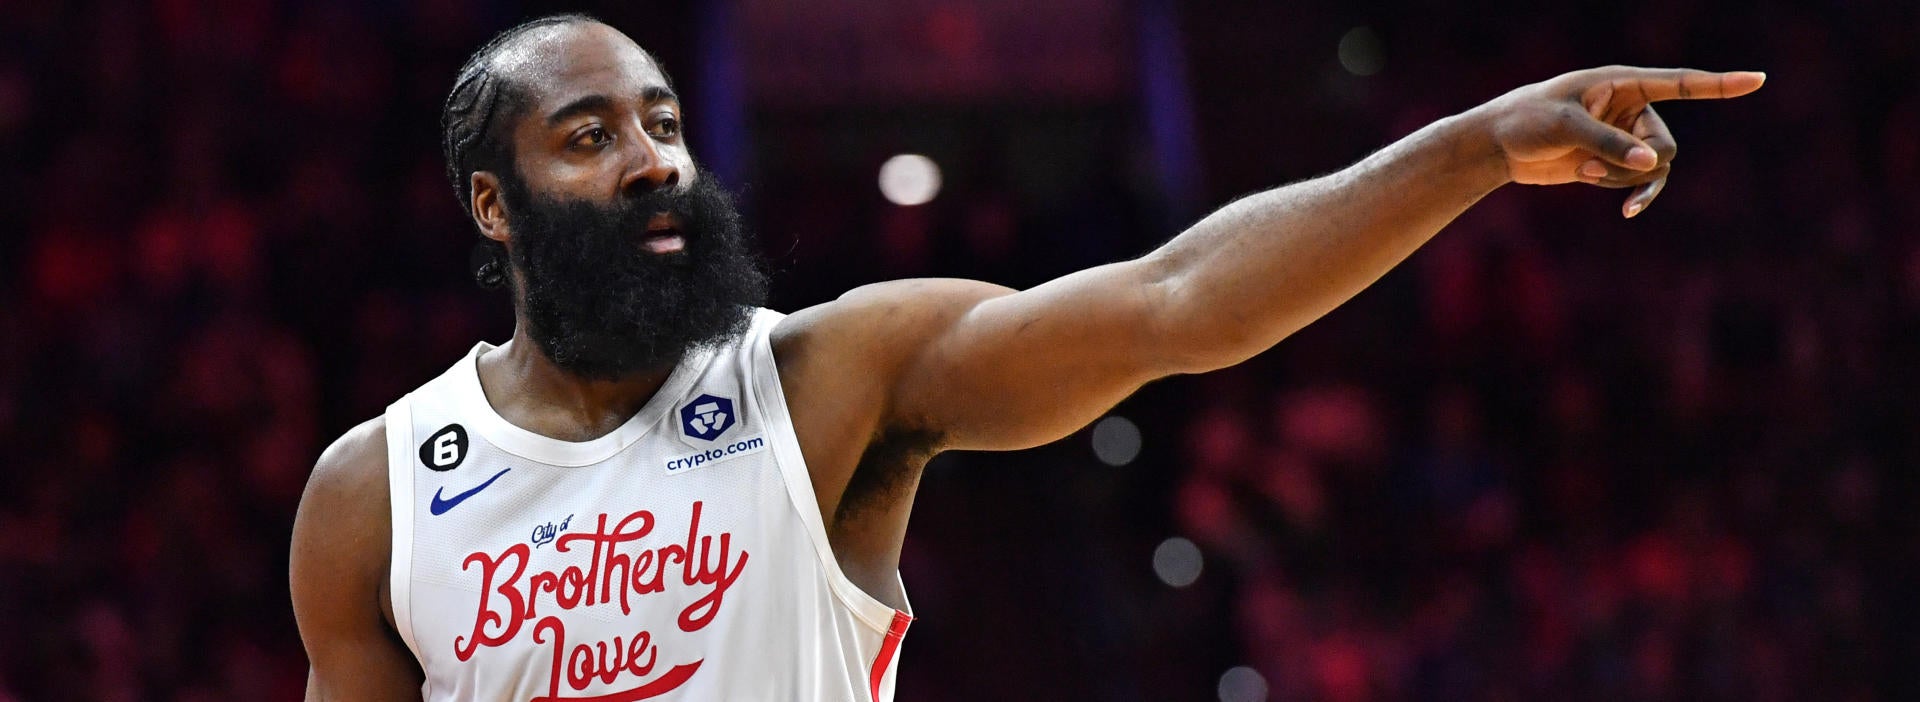 James Harden next team trade odds: Clippers clear favorites to acquire NBA All-Star from 76ers, with Knicks, Rockets, Lakers, Heat lurking